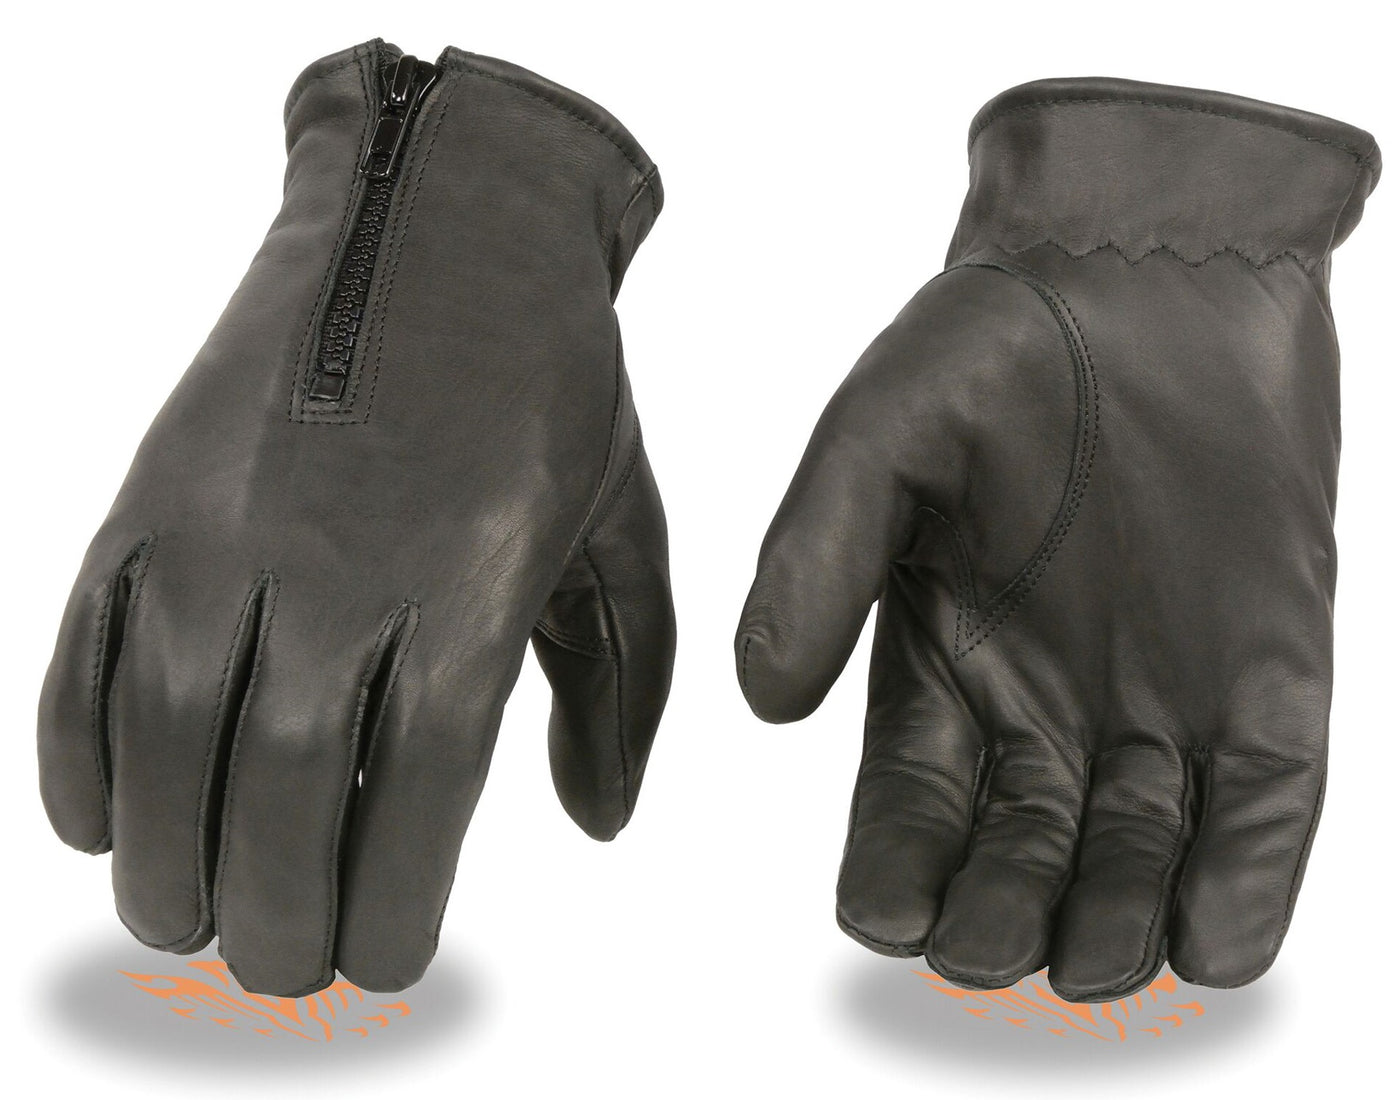 Leather Zipped Gloves*Premium Cowhide Leather Thermal Lining Zippered Wrist Closure XS - 3X Unisex sizing Available in our retail shop in Smyrna, TN, just outside of Nashville